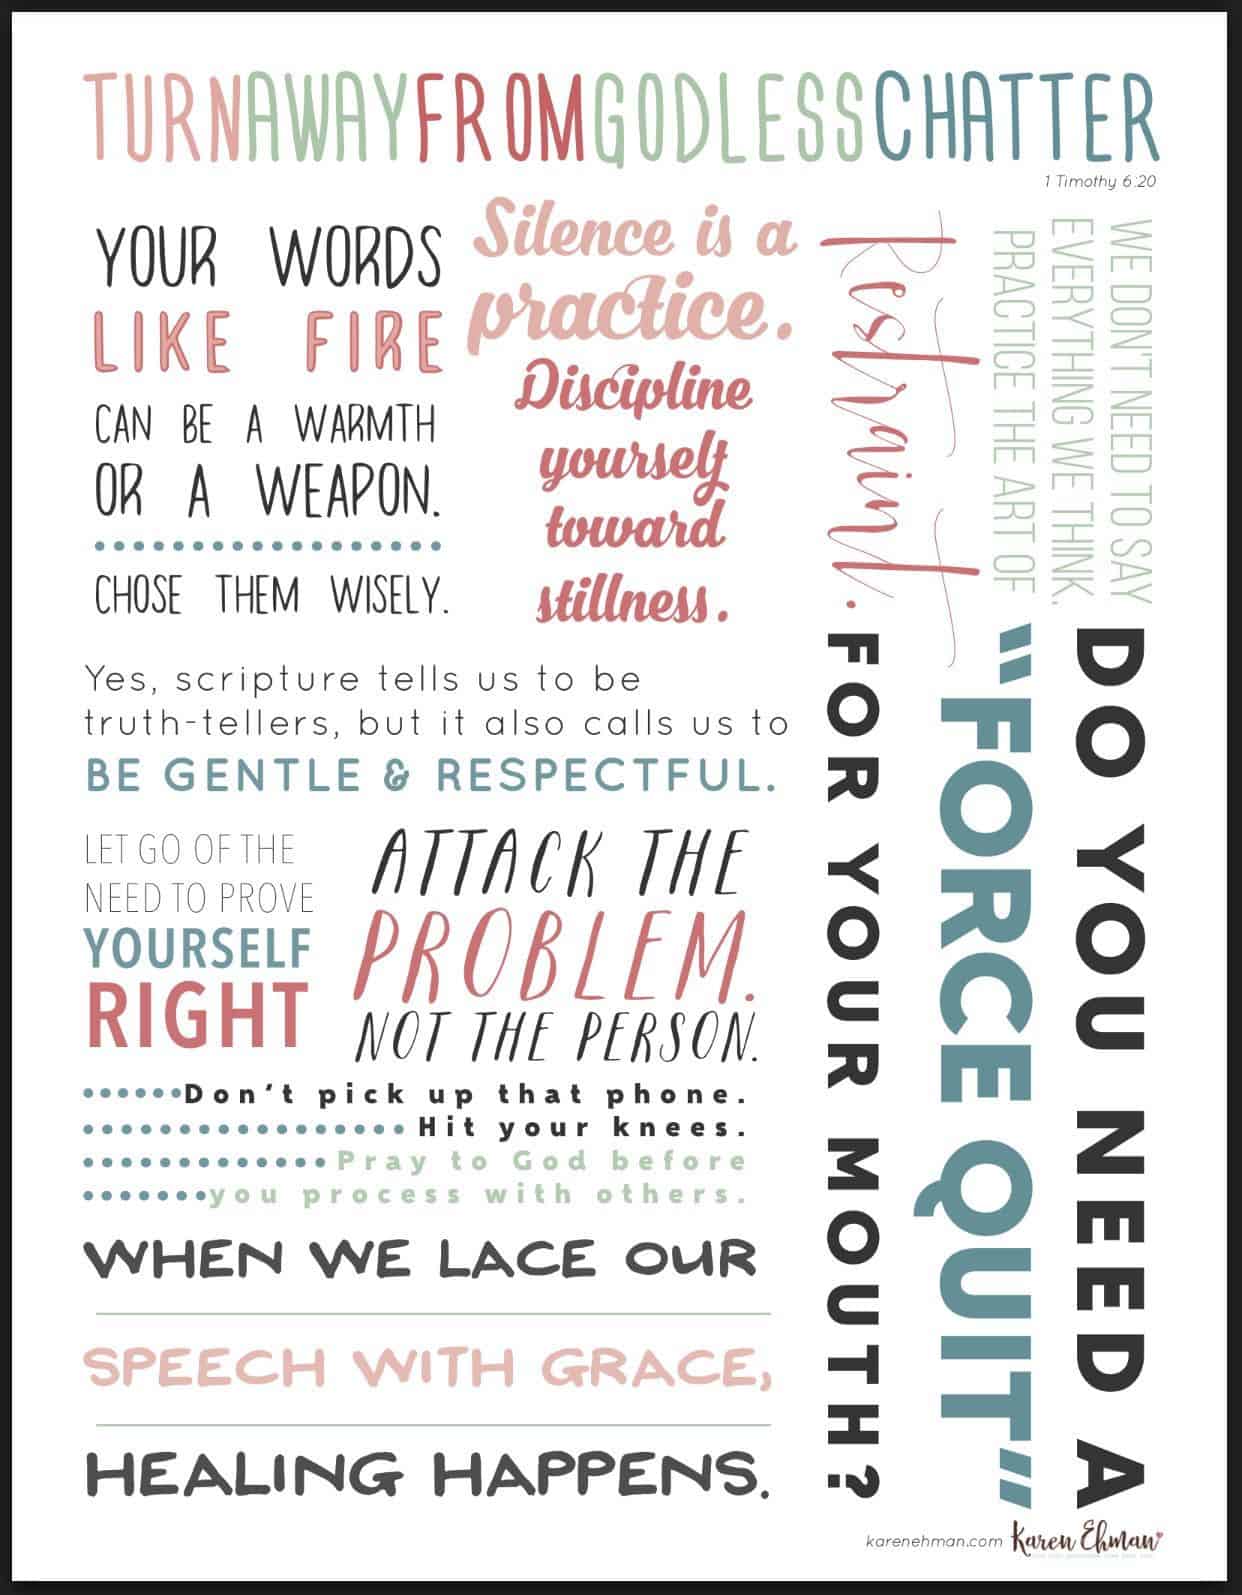 Lace your speech with grace with this FREE printable from Karen Ehman. Click here to download.